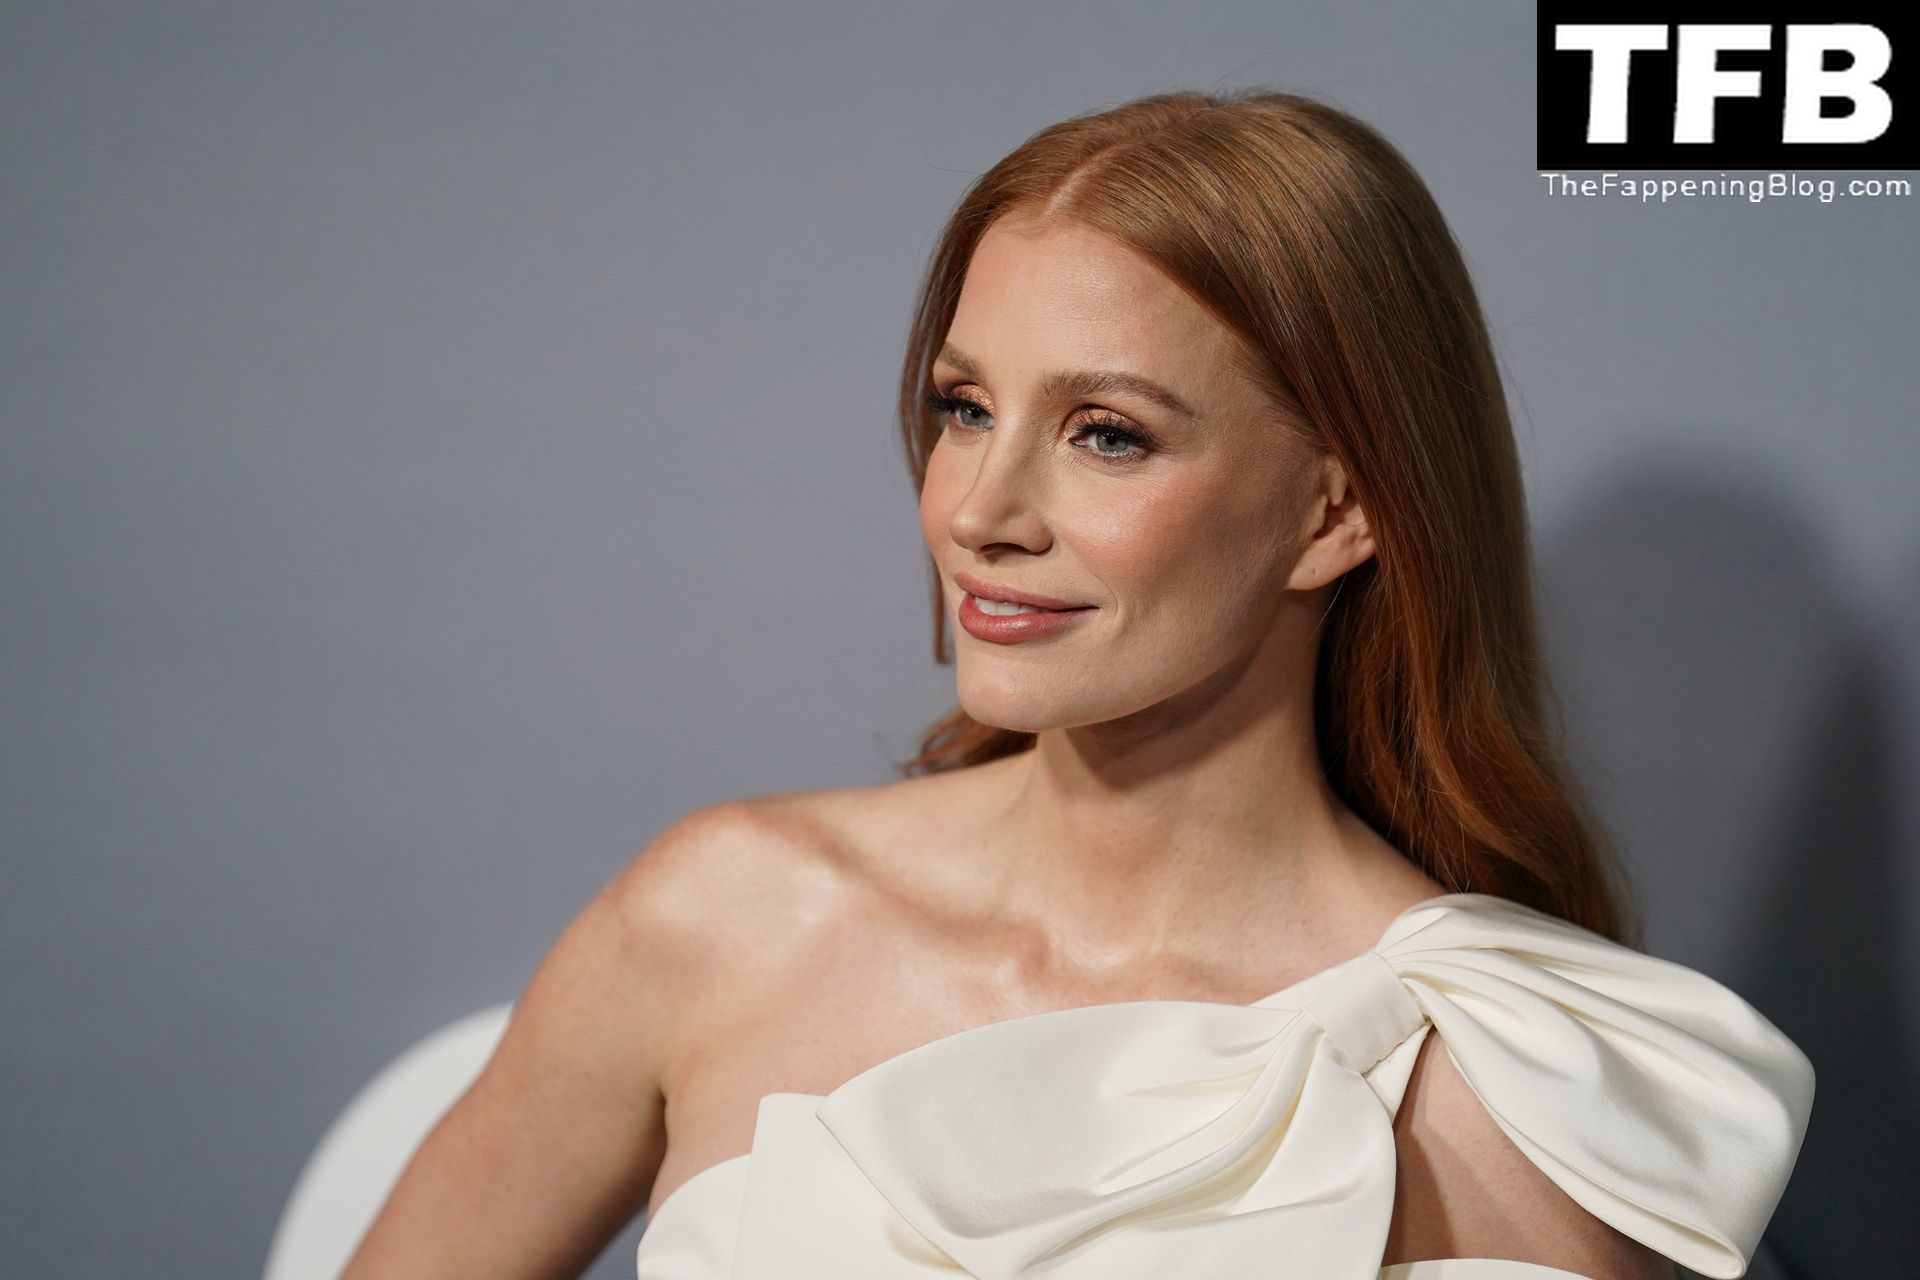 Jessica-Chastain-Sexy-The-Fappening-Blog-123-1.jpg